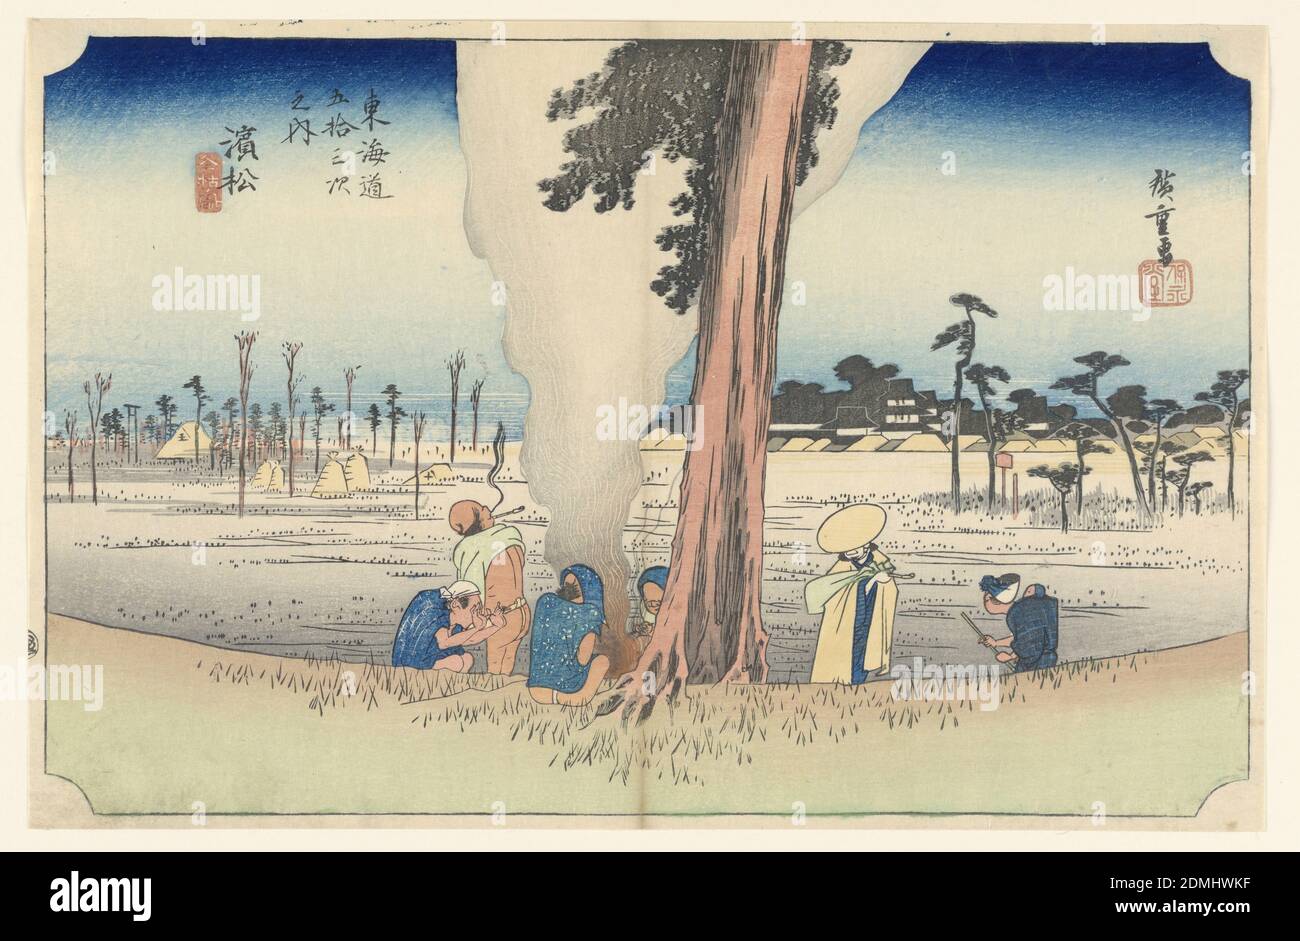 Hamamatsu, Wintertime, in The Fifty-Three Stations of the Tokaido Road (Tokaido Gojusan Tsugi-no Uchi), Ando Hiroshige, Japanese, 1797–1858, Woodblock print (ukiyo-e) on mulberry paper (washi), ink with color, Here is the subdued scene of farmers warming themselves by a fire under a giant cryptomeria tree overlooks the famous battlefield of Mikatagahara and castle of the first Tokugawa shogun, Ieyasu., Japan, ca. 1834, figures, Print Stock Photo